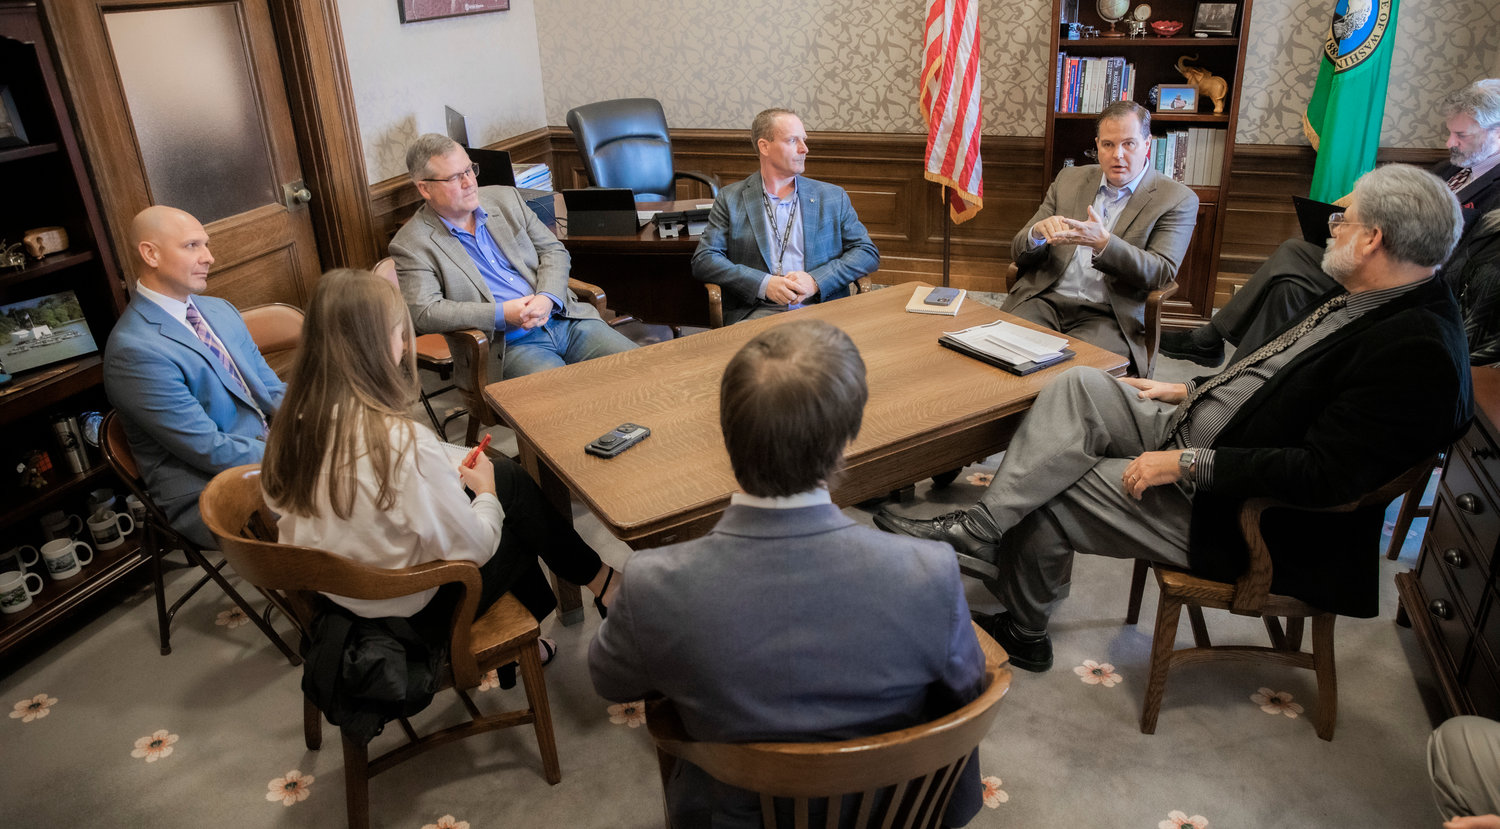 Clockwise from top left, state Rep. Peter Abbarno, House Republican Leader J.T. Wilcox, Chronicle Publisher Chad Taylor, Senate Republican Leader John Braun, state Rep. Ed Orcutt, Chronicle reporter Matthew Zylstra and Chronicle Assistant Editor Isabel Vander Stoep discuss the legislative session in Braun’s office at the Capitol on Jan. 20.